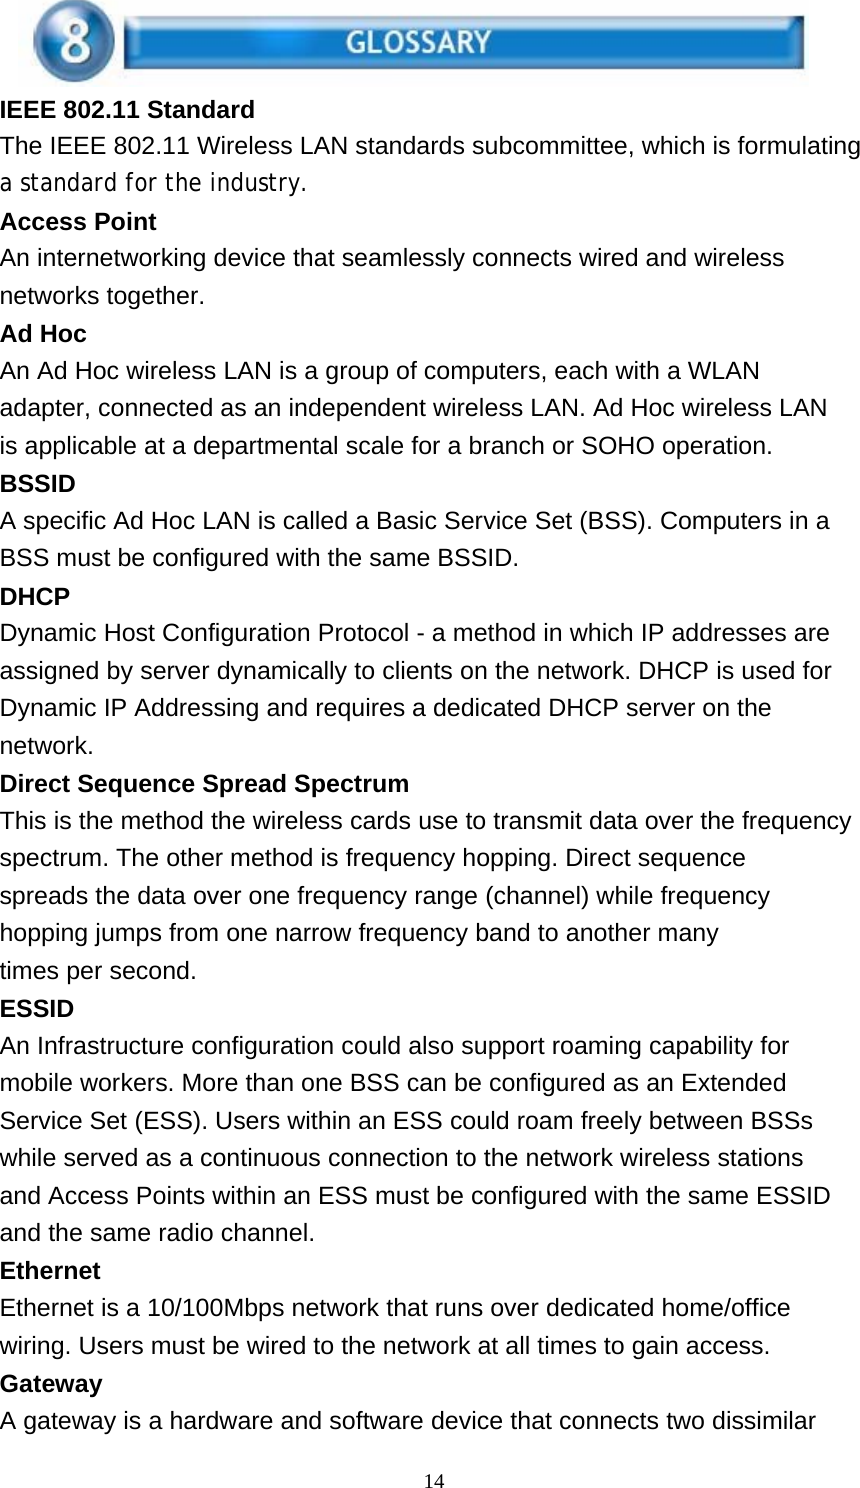 14    IEEE 802.11 Standard The IEEE 802.11 Wireless LAN standards subcommittee, which is formulating a standard for the industry. Access Point An internetworking device that seamlessly connects wired and wireless networks together. Ad Hoc An Ad Hoc wireless LAN is a group of computers, each with a WLAN adapter, connected as an independent wireless LAN. Ad Hoc wireless LAN is applicable at a departmental scale for a branch or SOHO operation. BSSID A specific Ad Hoc LAN is called a Basic Service Set (BSS). Computers in a BSS must be configured with the same BSSID. DHCP Dynamic Host Configuration Protocol - a method in which IP addresses are assigned by server dynamically to clients on the network. DHCP is used for Dynamic IP Addressing and requires a dedicated DHCP server on the network. Direct Sequence Spread Spectrum This is the method the wireless cards use to transmit data over the frequency spectrum. The other method is frequency hopping. Direct sequence spreads the data over one frequency range (channel) while frequency hopping jumps from one narrow frequency band to another many times per second. ESSID An Infrastructure configuration could also support roaming capability for mobile workers. More than one BSS can be configured as an Extended Service Set (ESS). Users within an ESS could roam freely between BSSs while served as a continuous connection to the network wireless stations and Access Points within an ESS must be configured with the same ESSID and the same radio channel. Ethernet Ethernet is a 10/100Mbps network that runs over dedicated home/office wiring. Users must be wired to the network at all times to gain access. Gateway A gateway is a hardware and software device that connects two dissimilar 